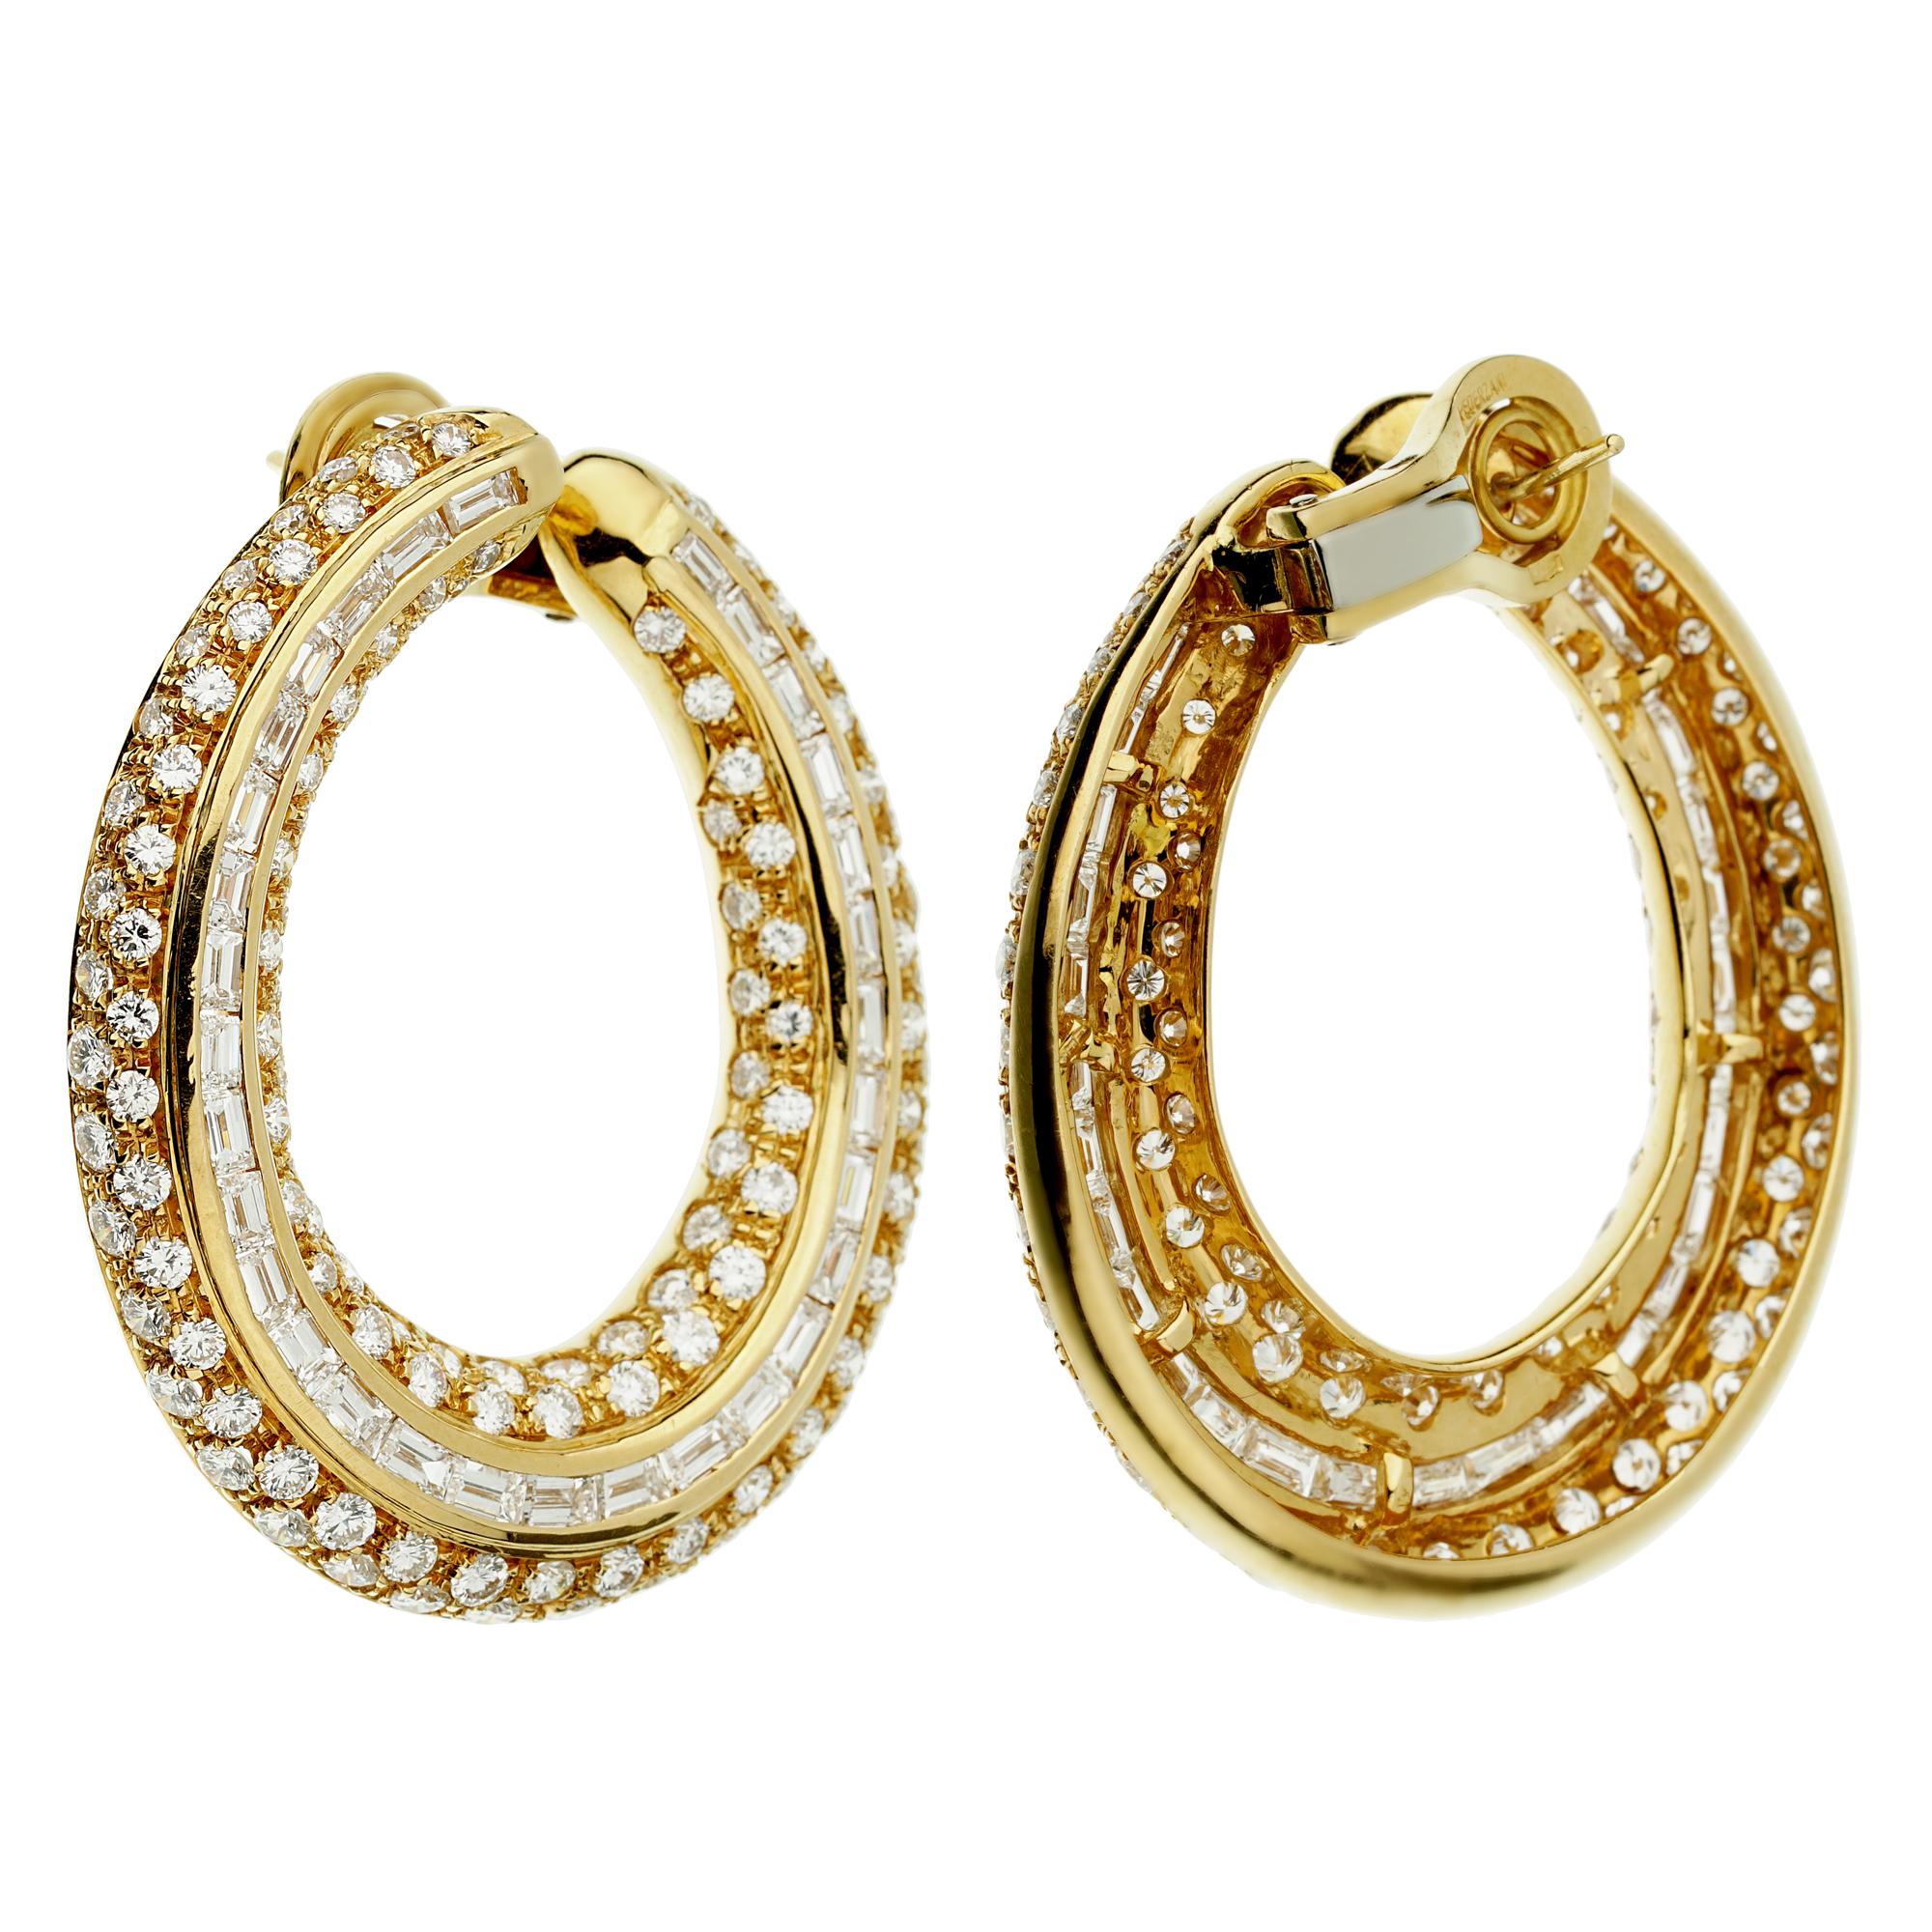 An incredible pair of Pederzani hoop earrings showcasing the finest round brilliant cut and baguette diamonds set in 18k yellow gold. The hoops have a total weight of appx 5.5cts and measures 1.69